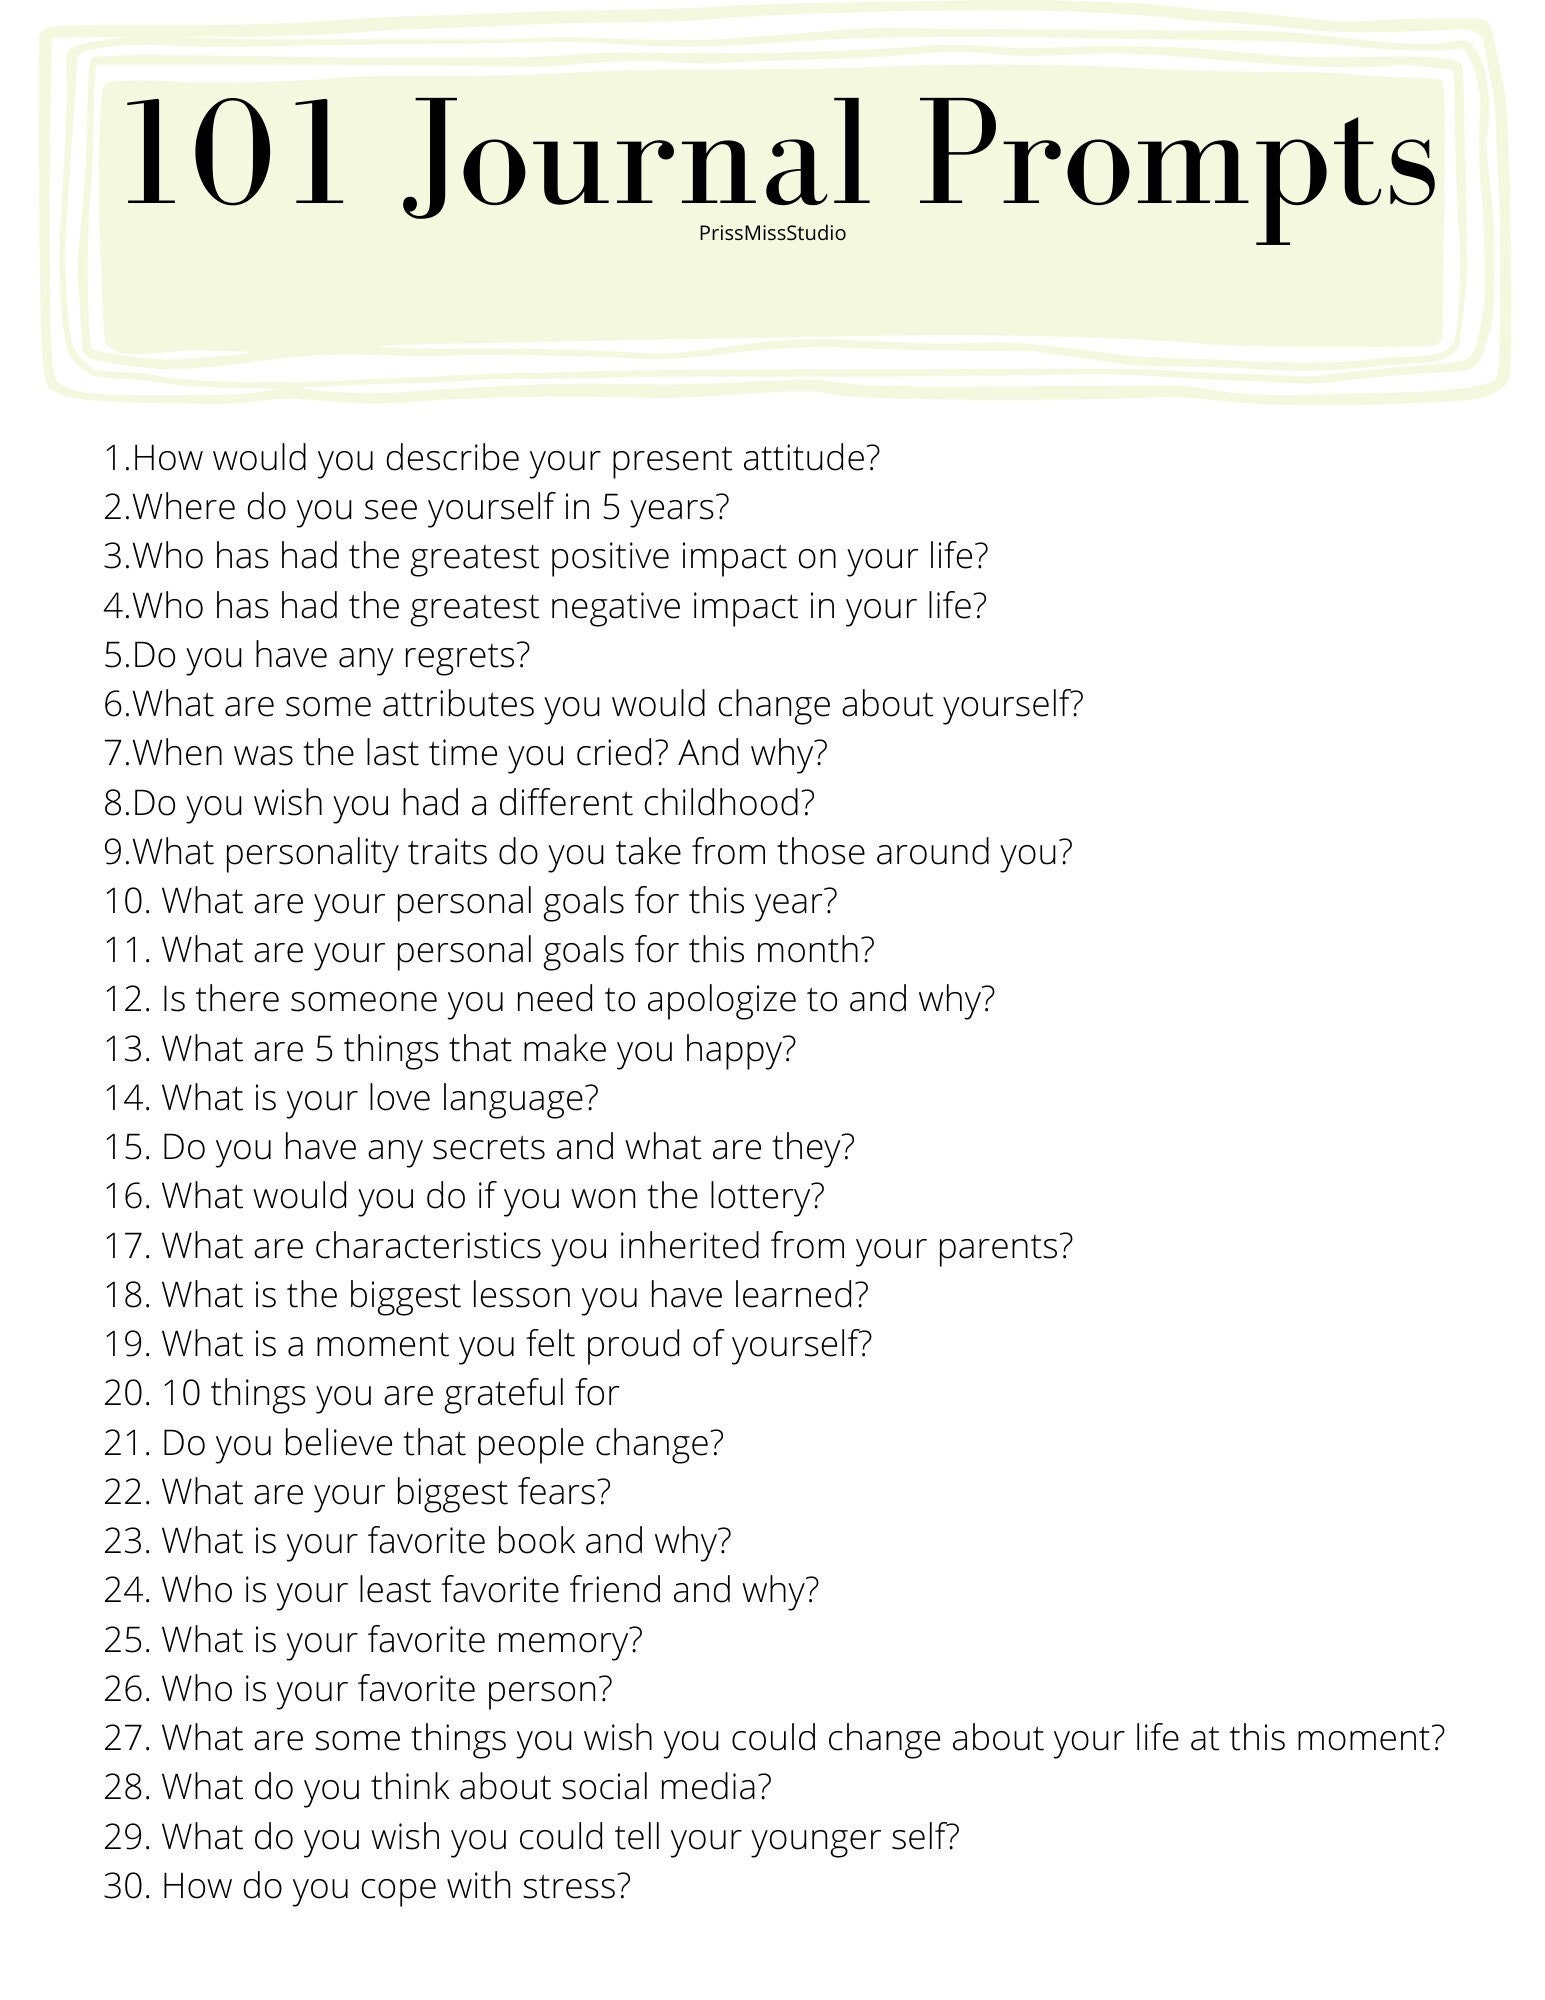 66 Journaling Prompts for Women ideas